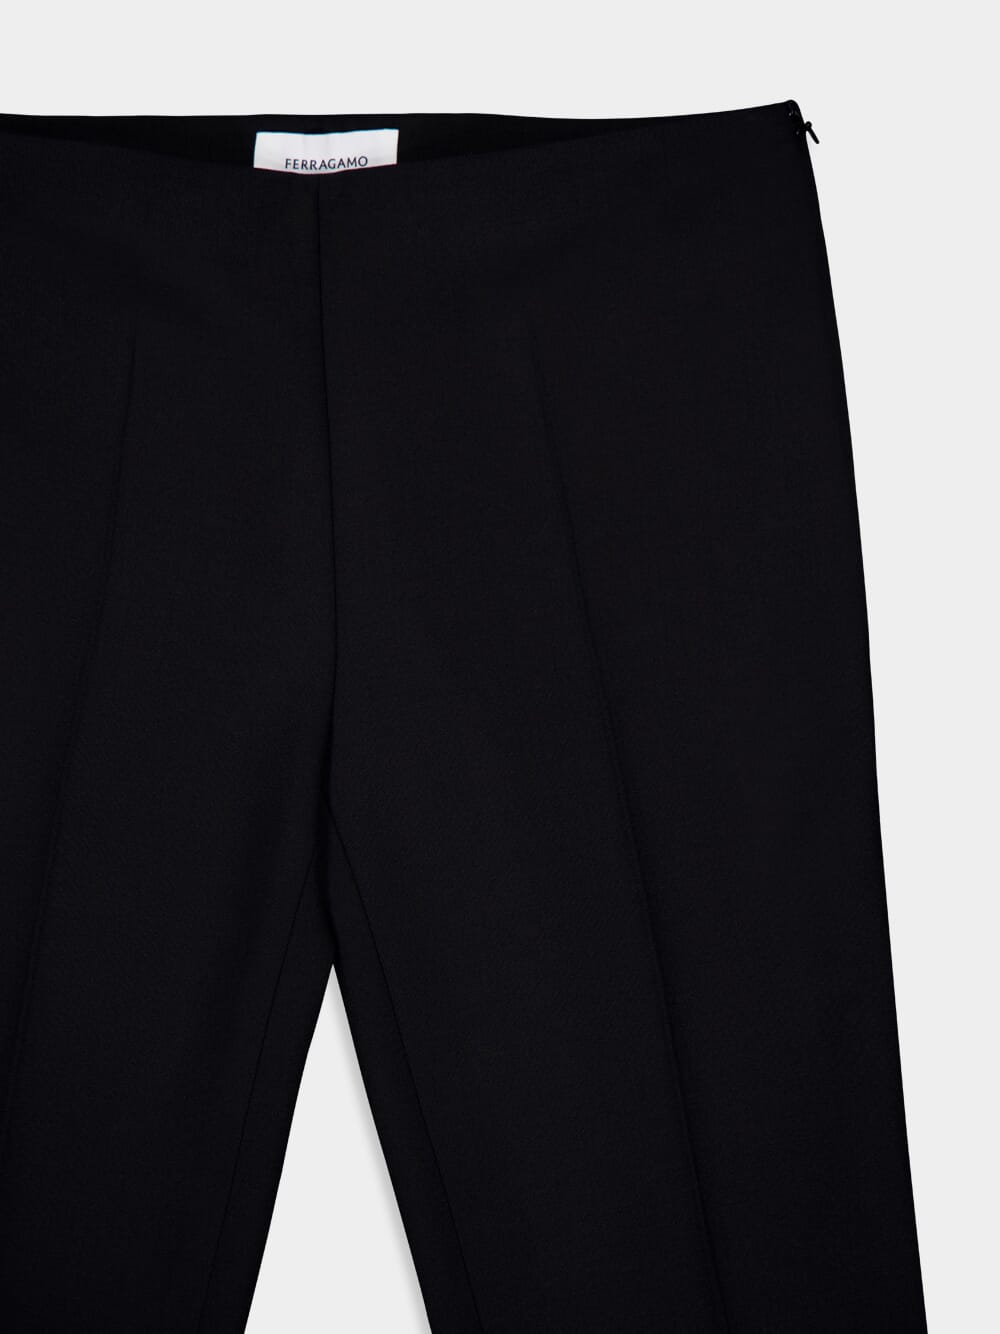 Slim-Fit Stretch Wool Trousers